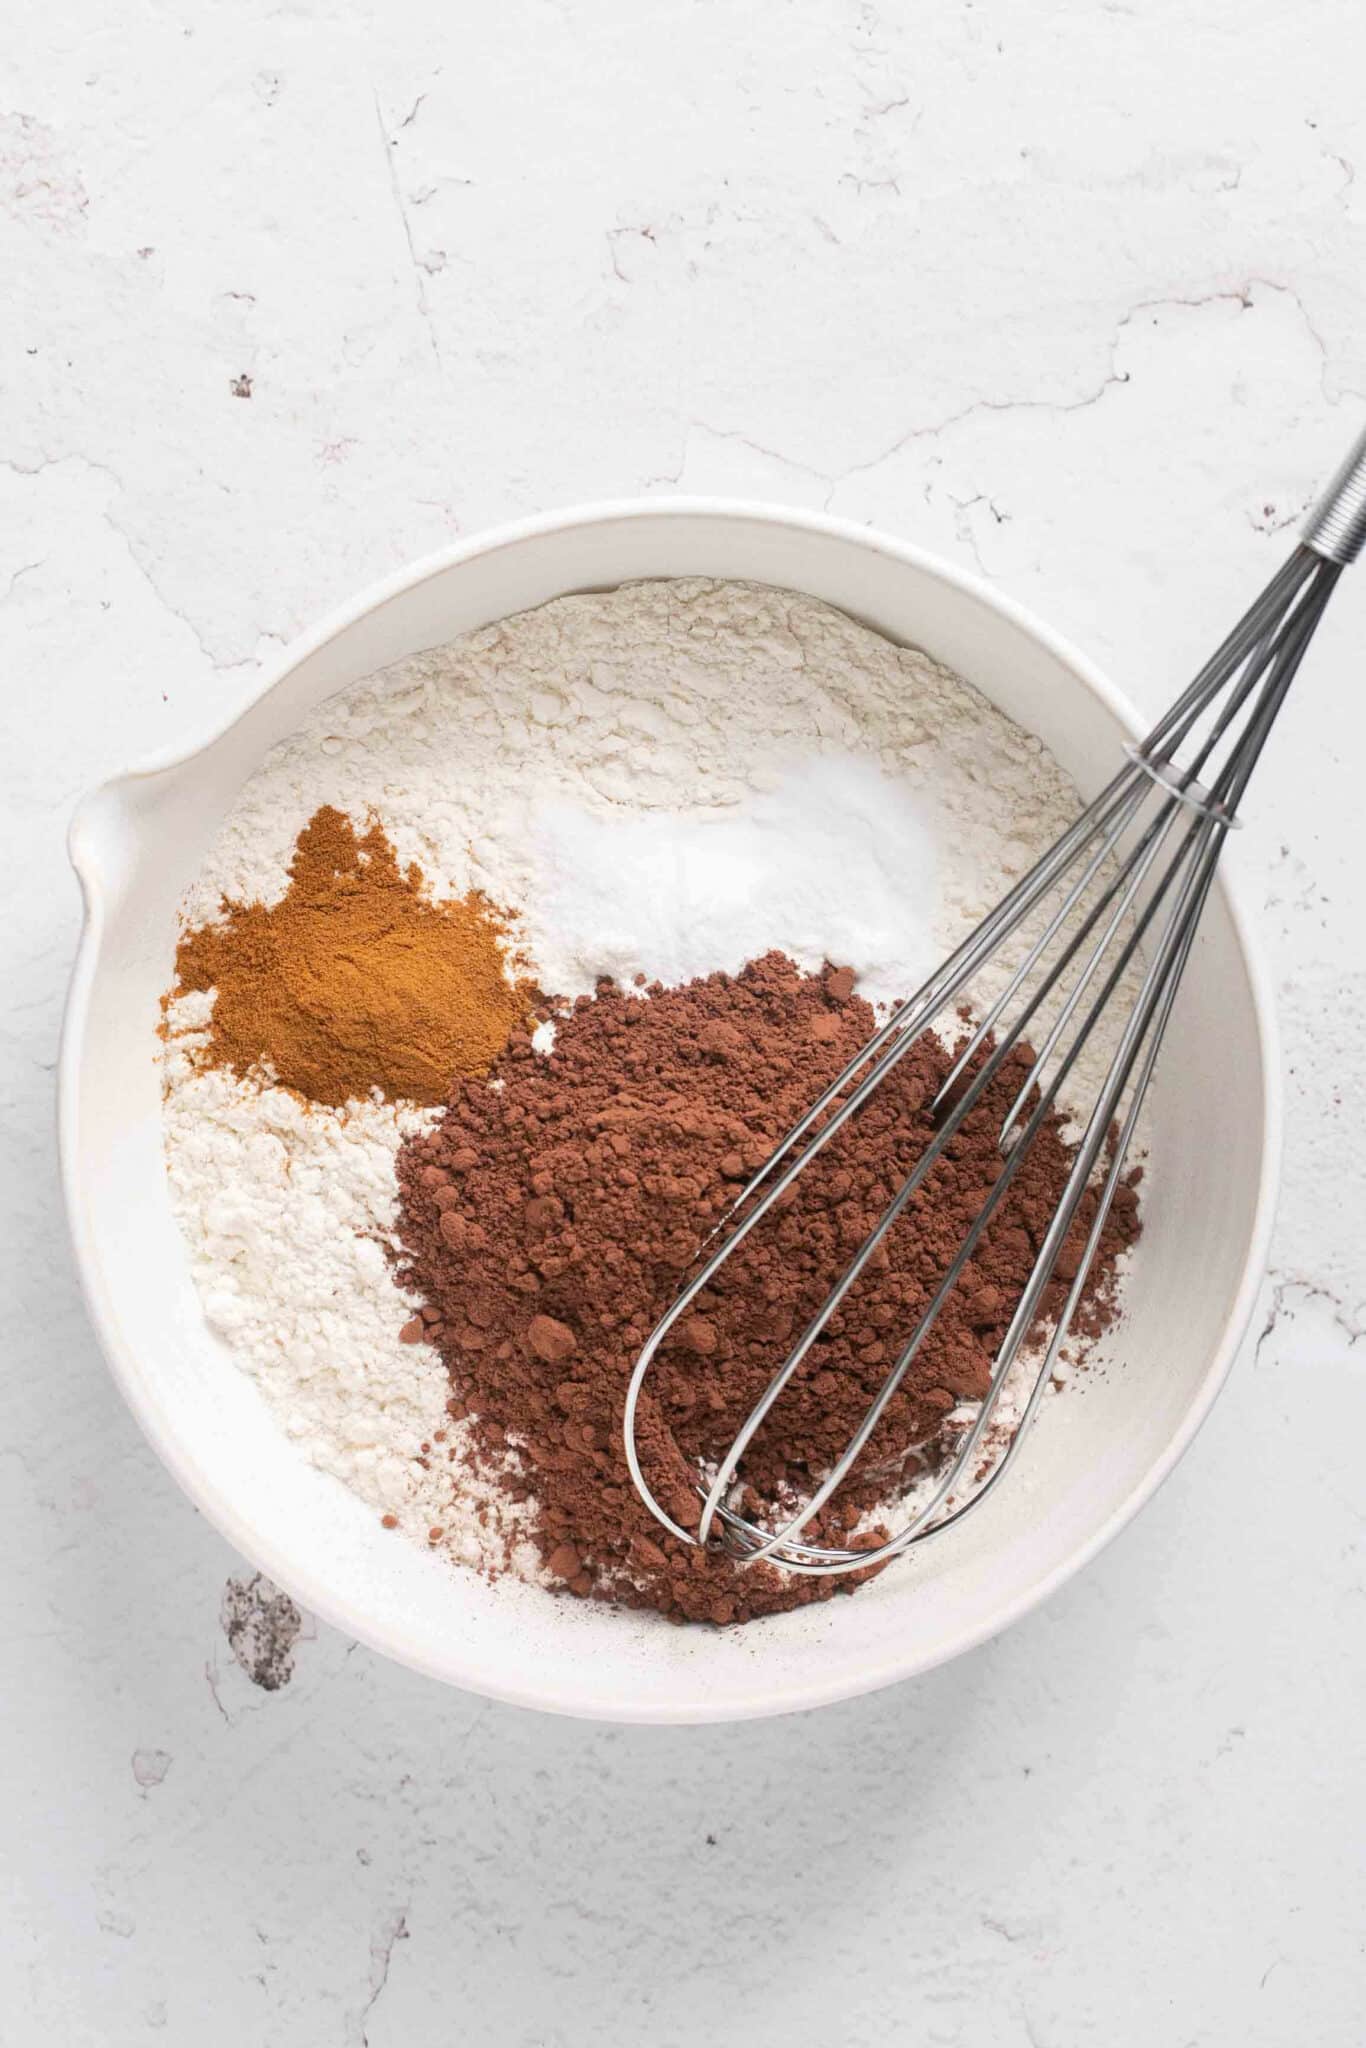 Whisking flour with cocoa powder and cinnamon.